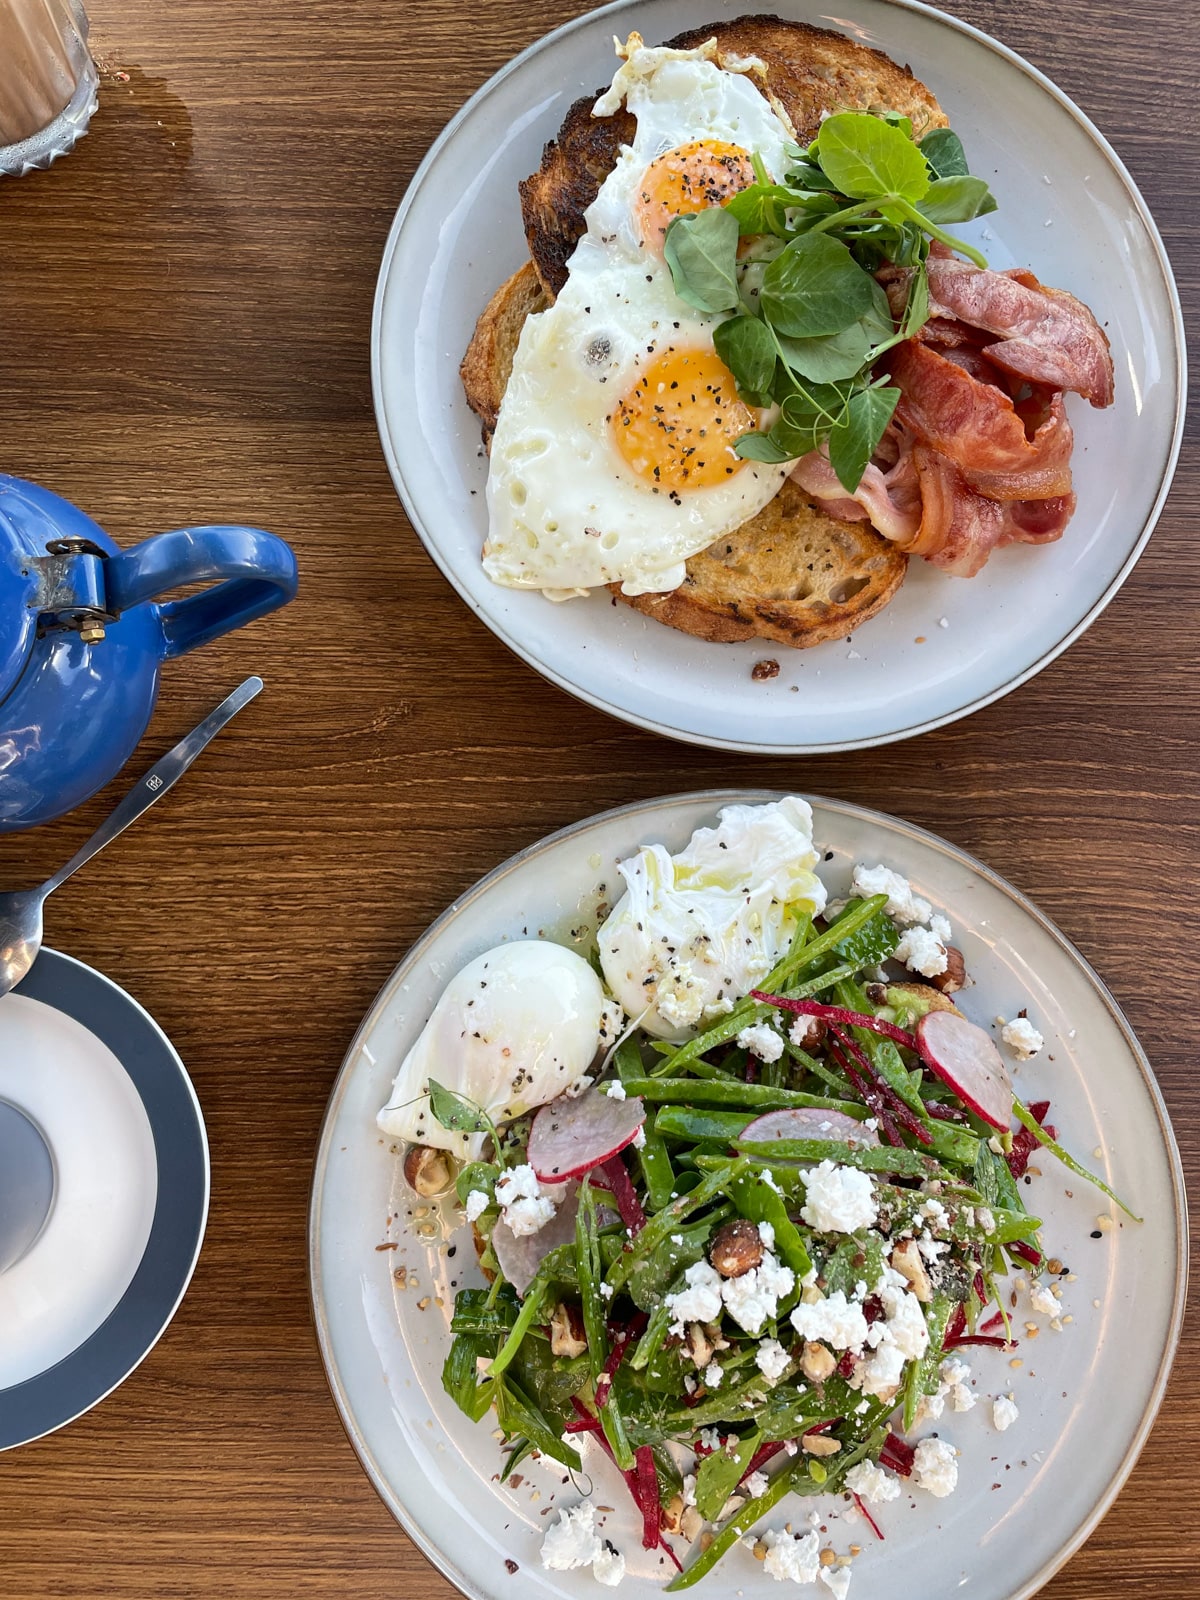 A birds-eye view of a wooden table with two plates; one plate is served with greens and avocado on toast with poached eggs and feta; the other is served with two fried eggs on toast with bacon